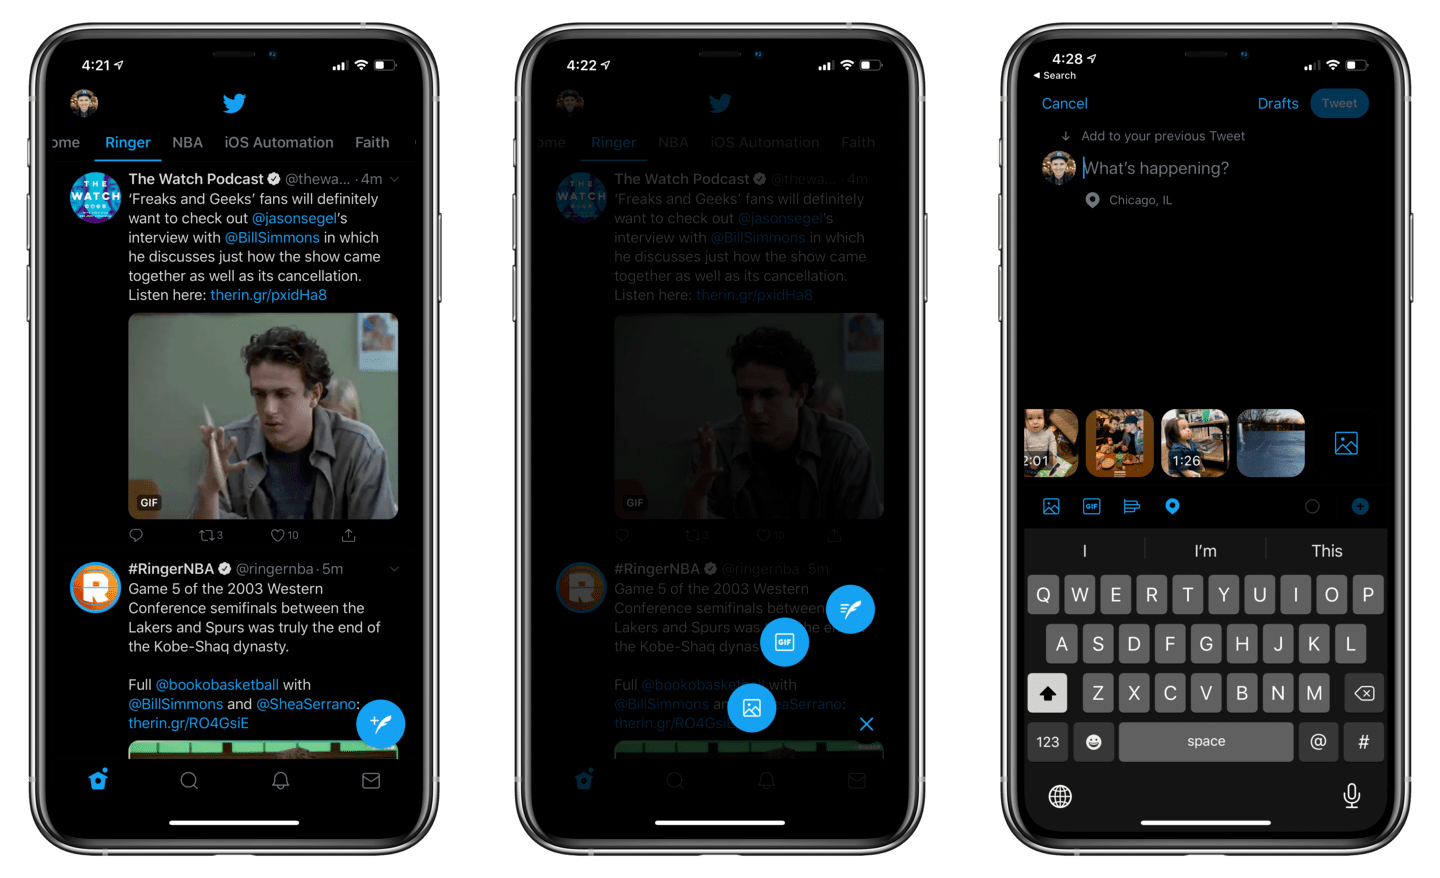 Twitter's tweet FAB allows text, image, and GIF options.